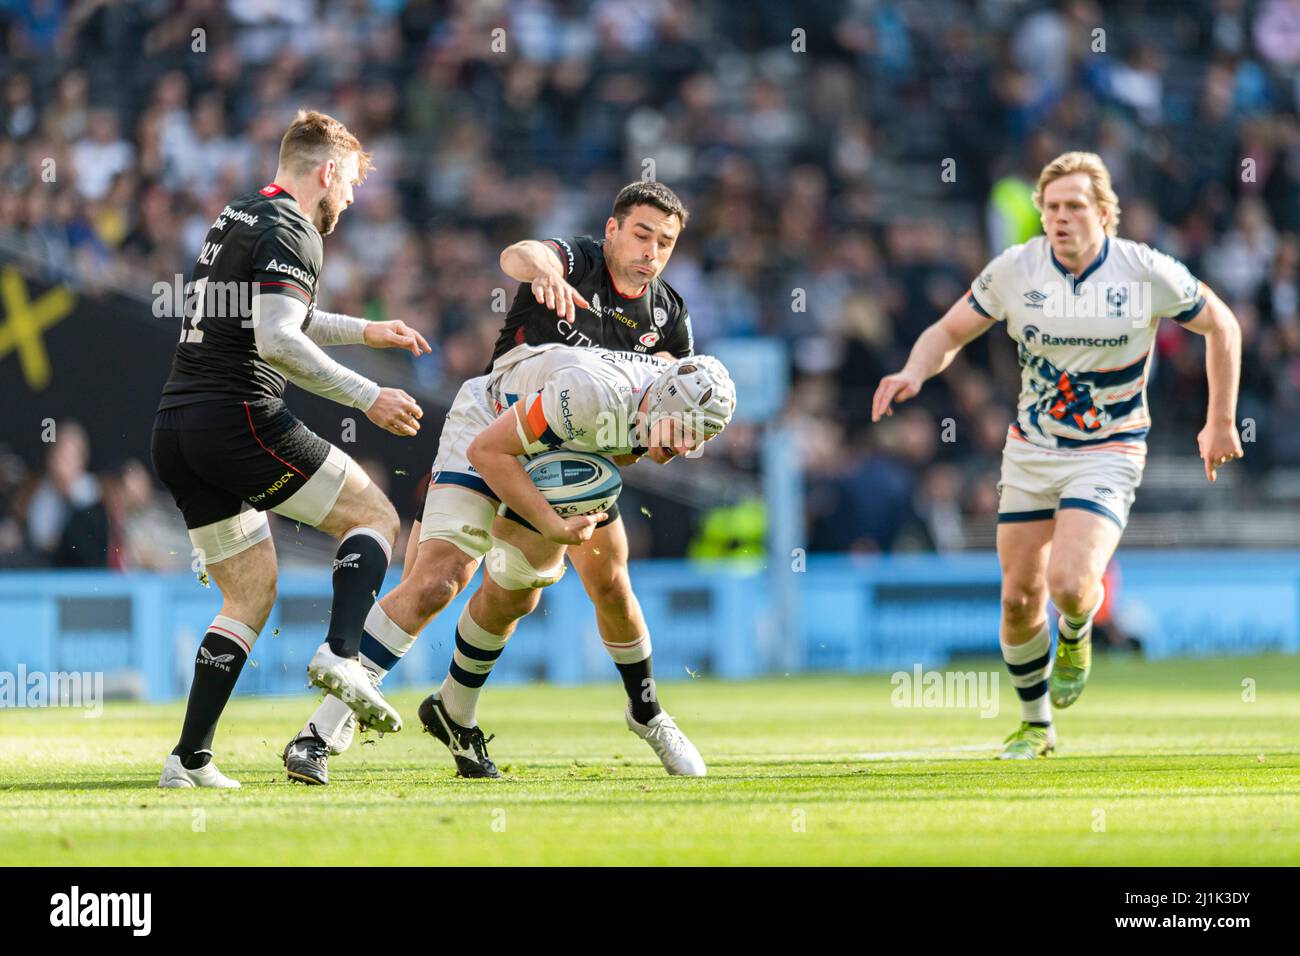 London, UK. 26th, Mar 2022. Fitz Harding of Bristol Bears (centre) is tackled during Gallagher Premiership Rugby - Saracens vs Bristol Bears at Tottenham Hotspur Stadium on Saturday, 26 March 2022. LONDON ENGLAND.  Credit: Taka G Wu/Alamy Live News Stock Photo